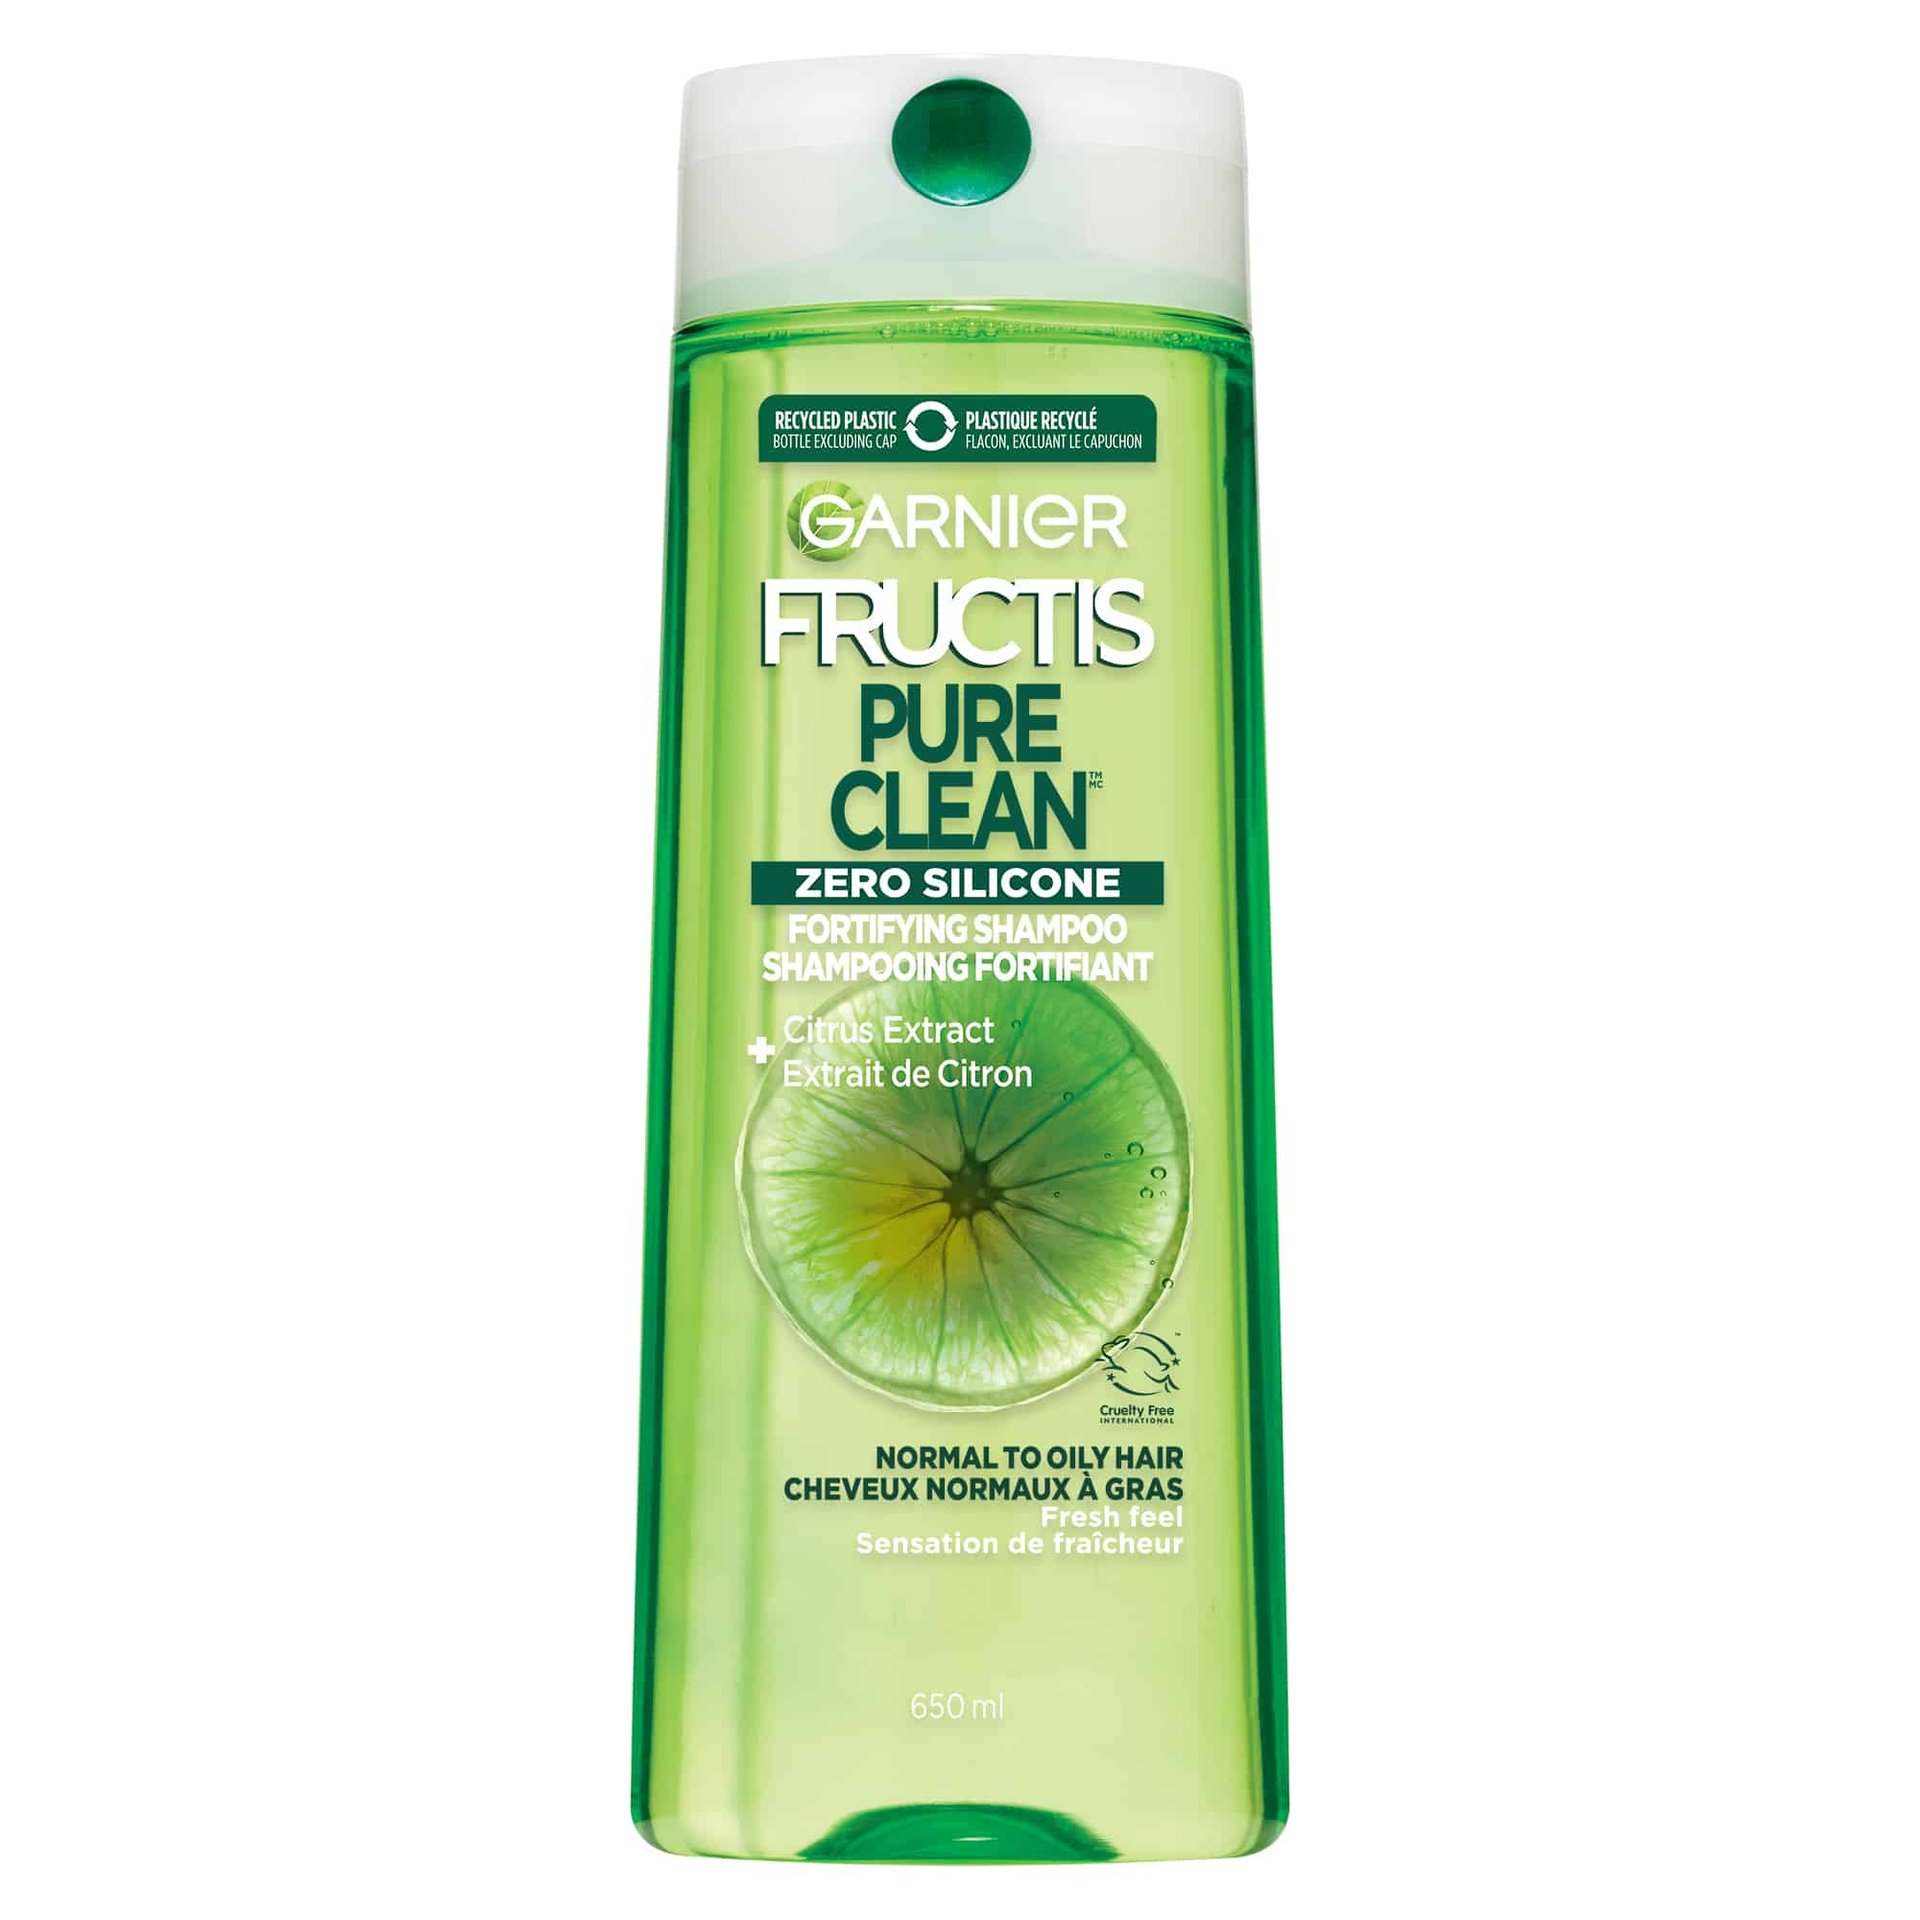 Shampoo_fructis pure clean 650ml Front 603084073238